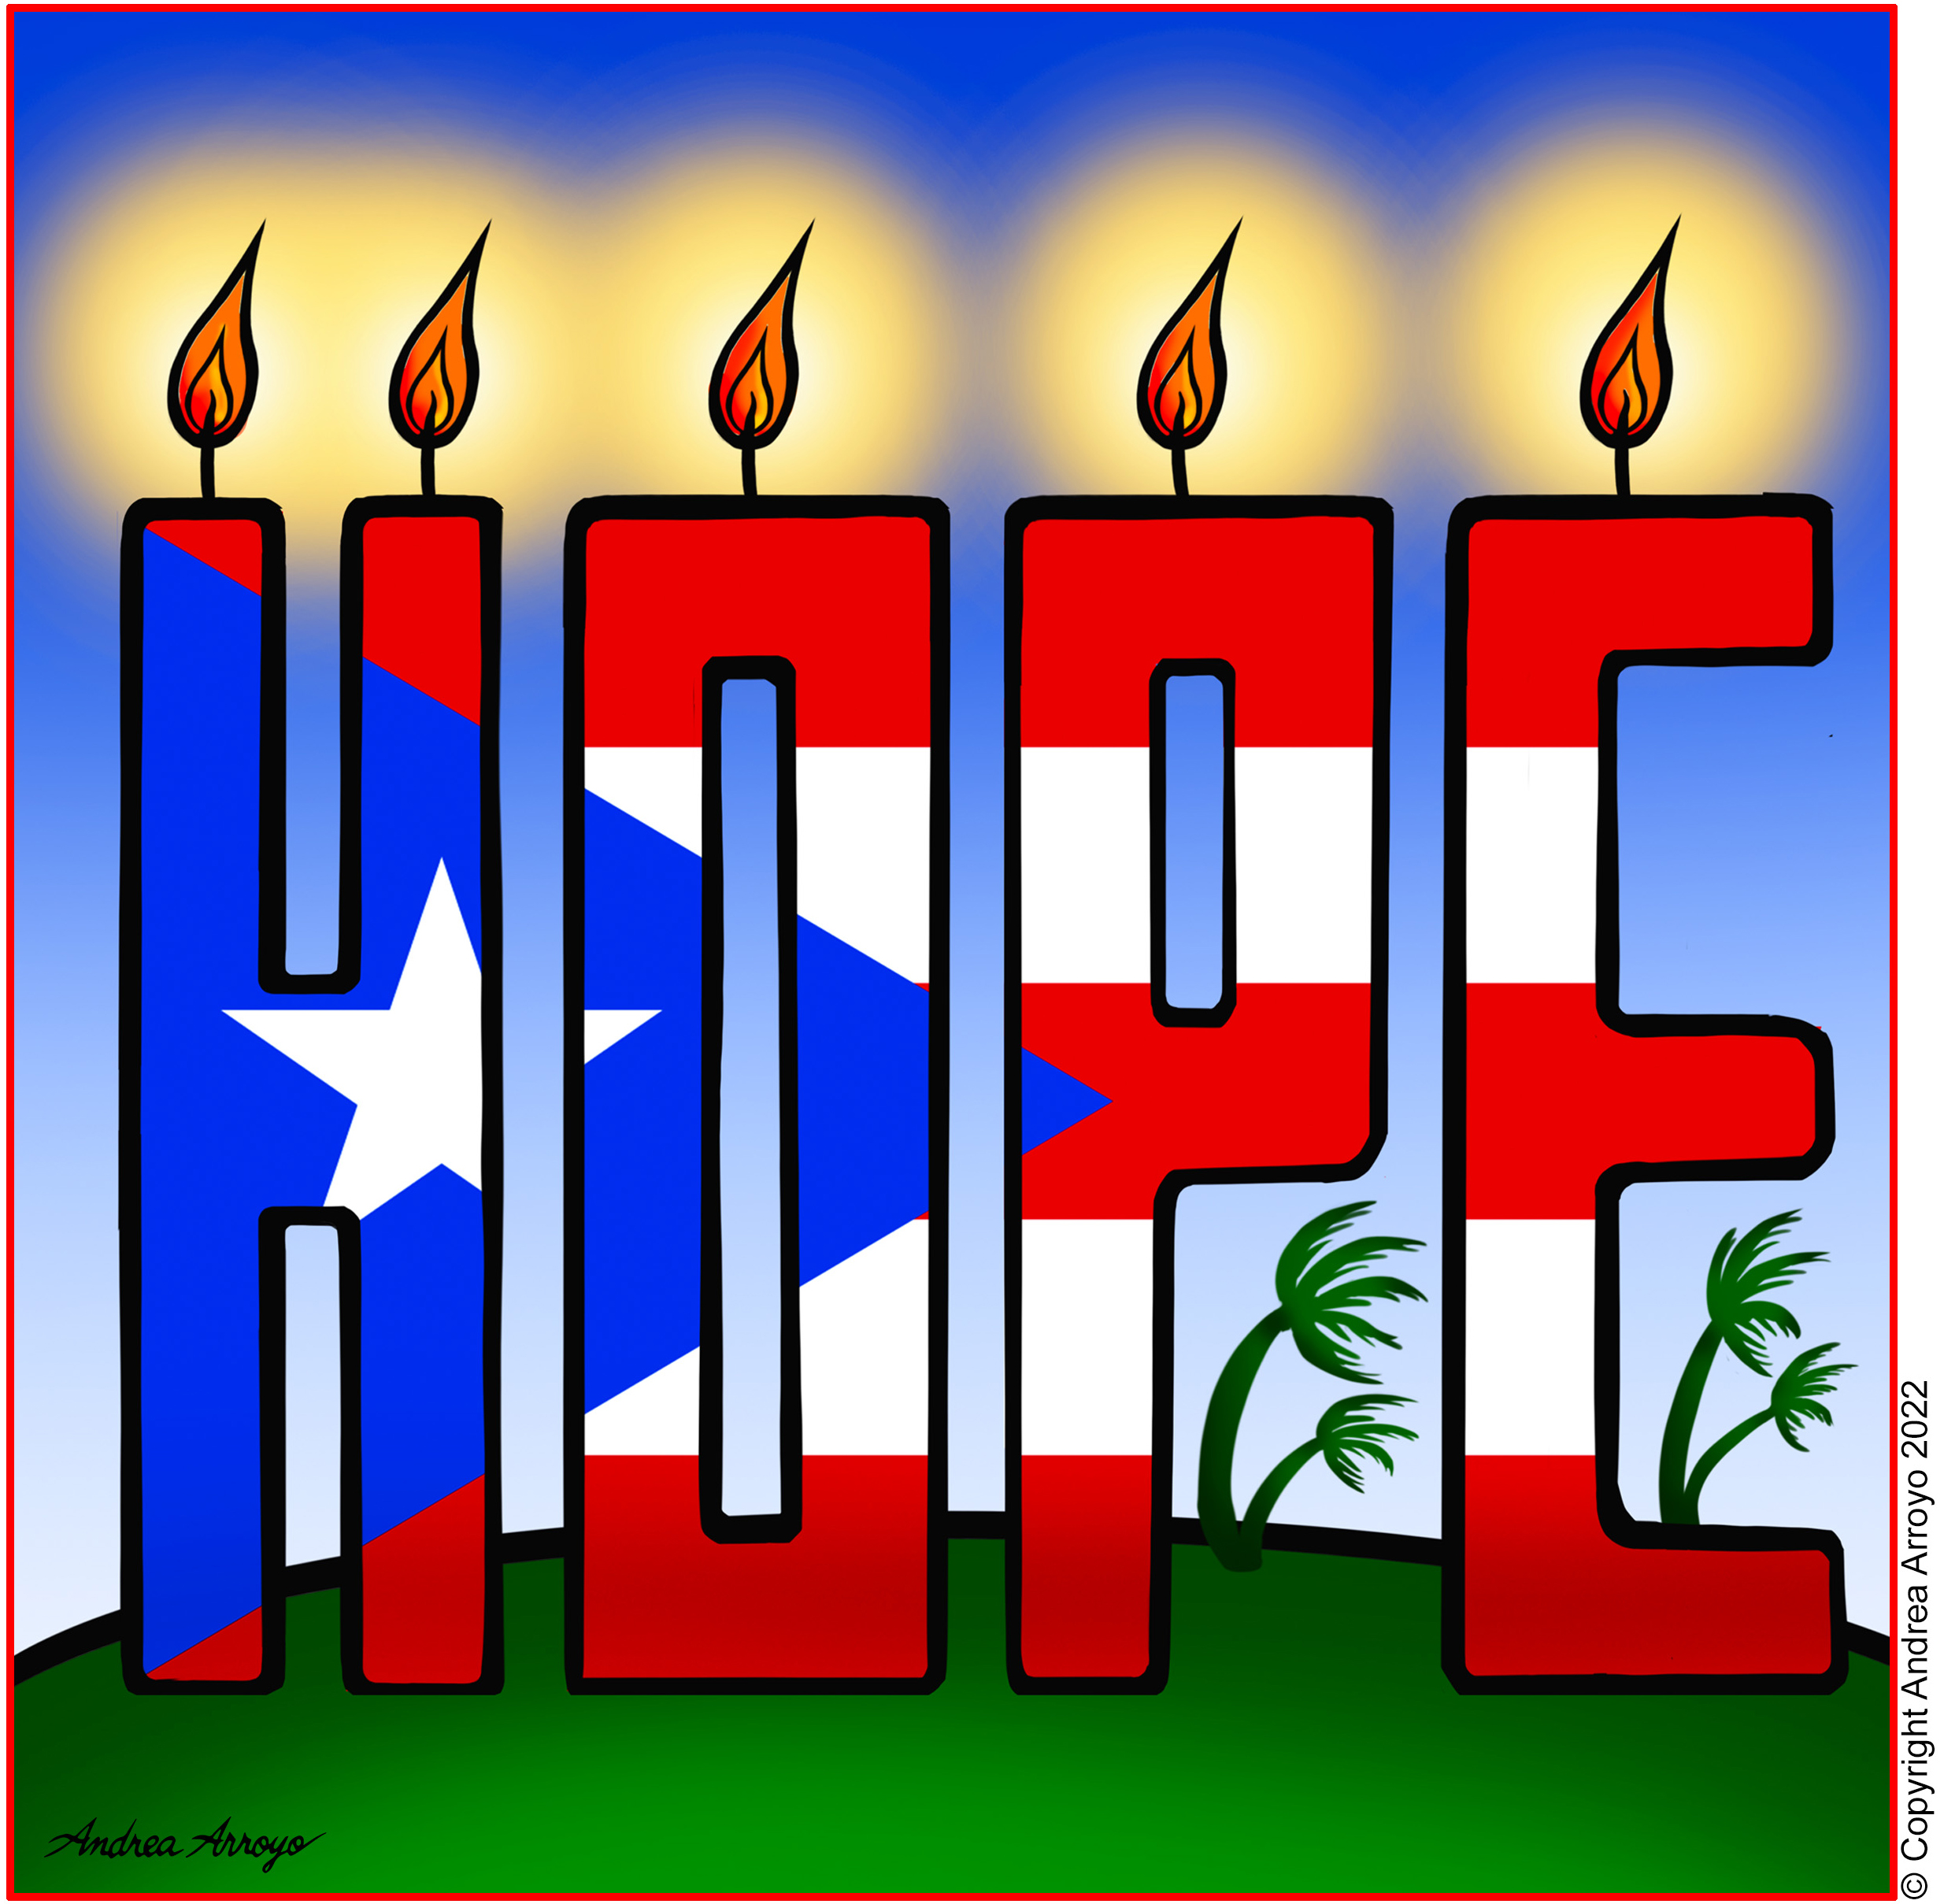 Hope and Action for Puerto Rico